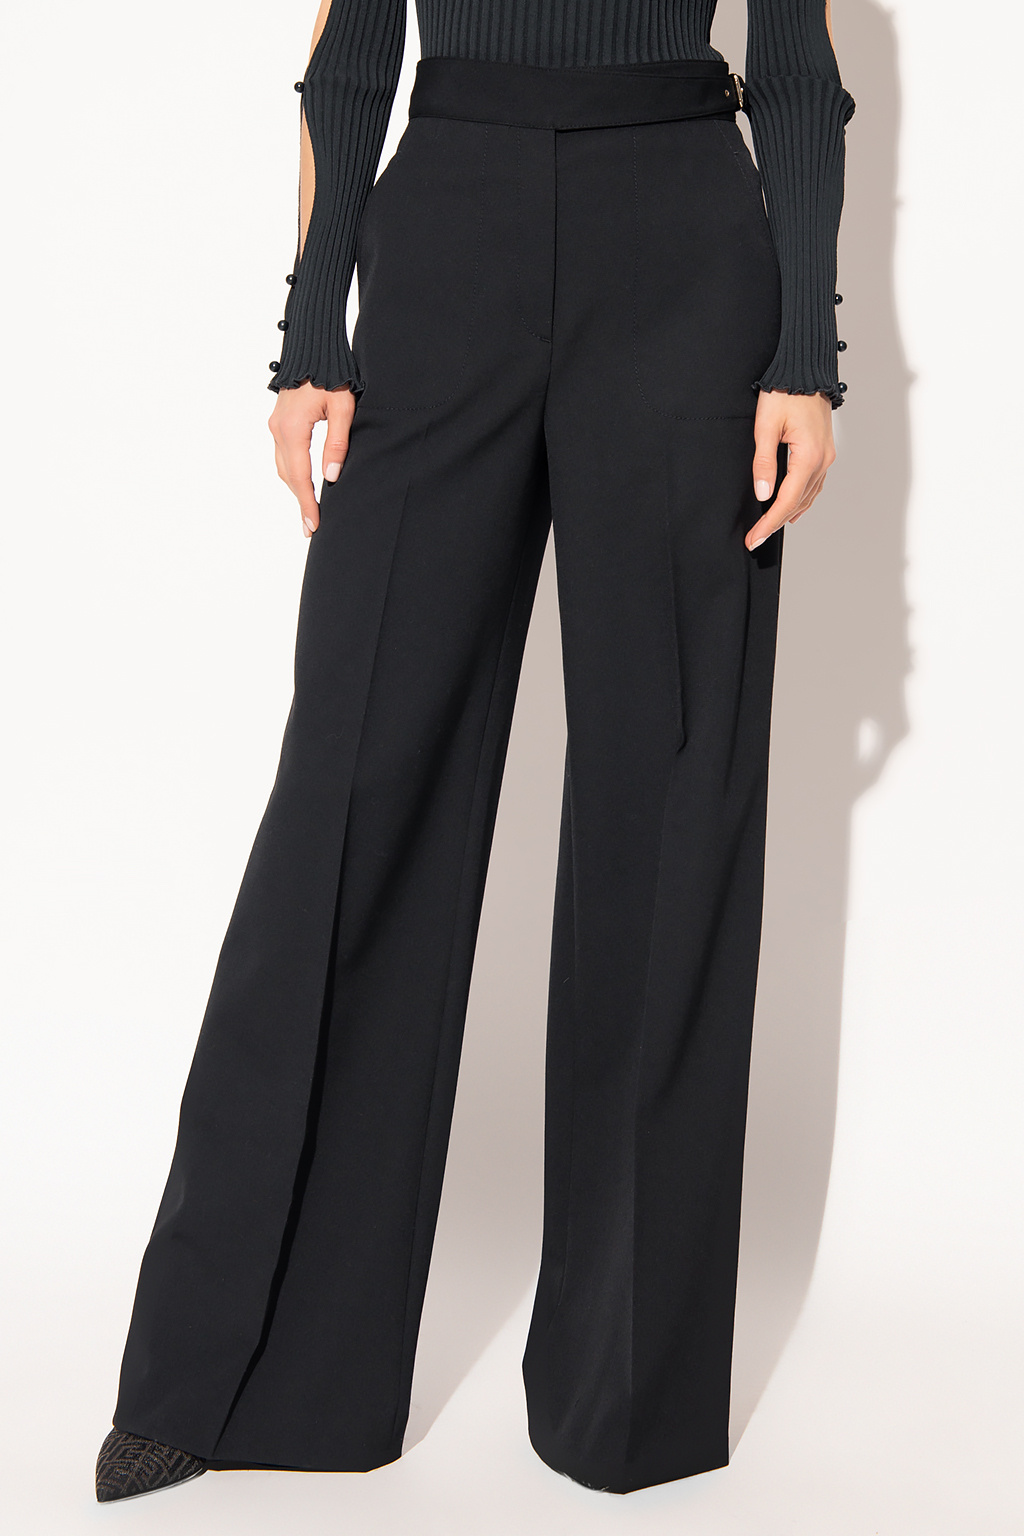 Red Valentino Wide-legged trousers